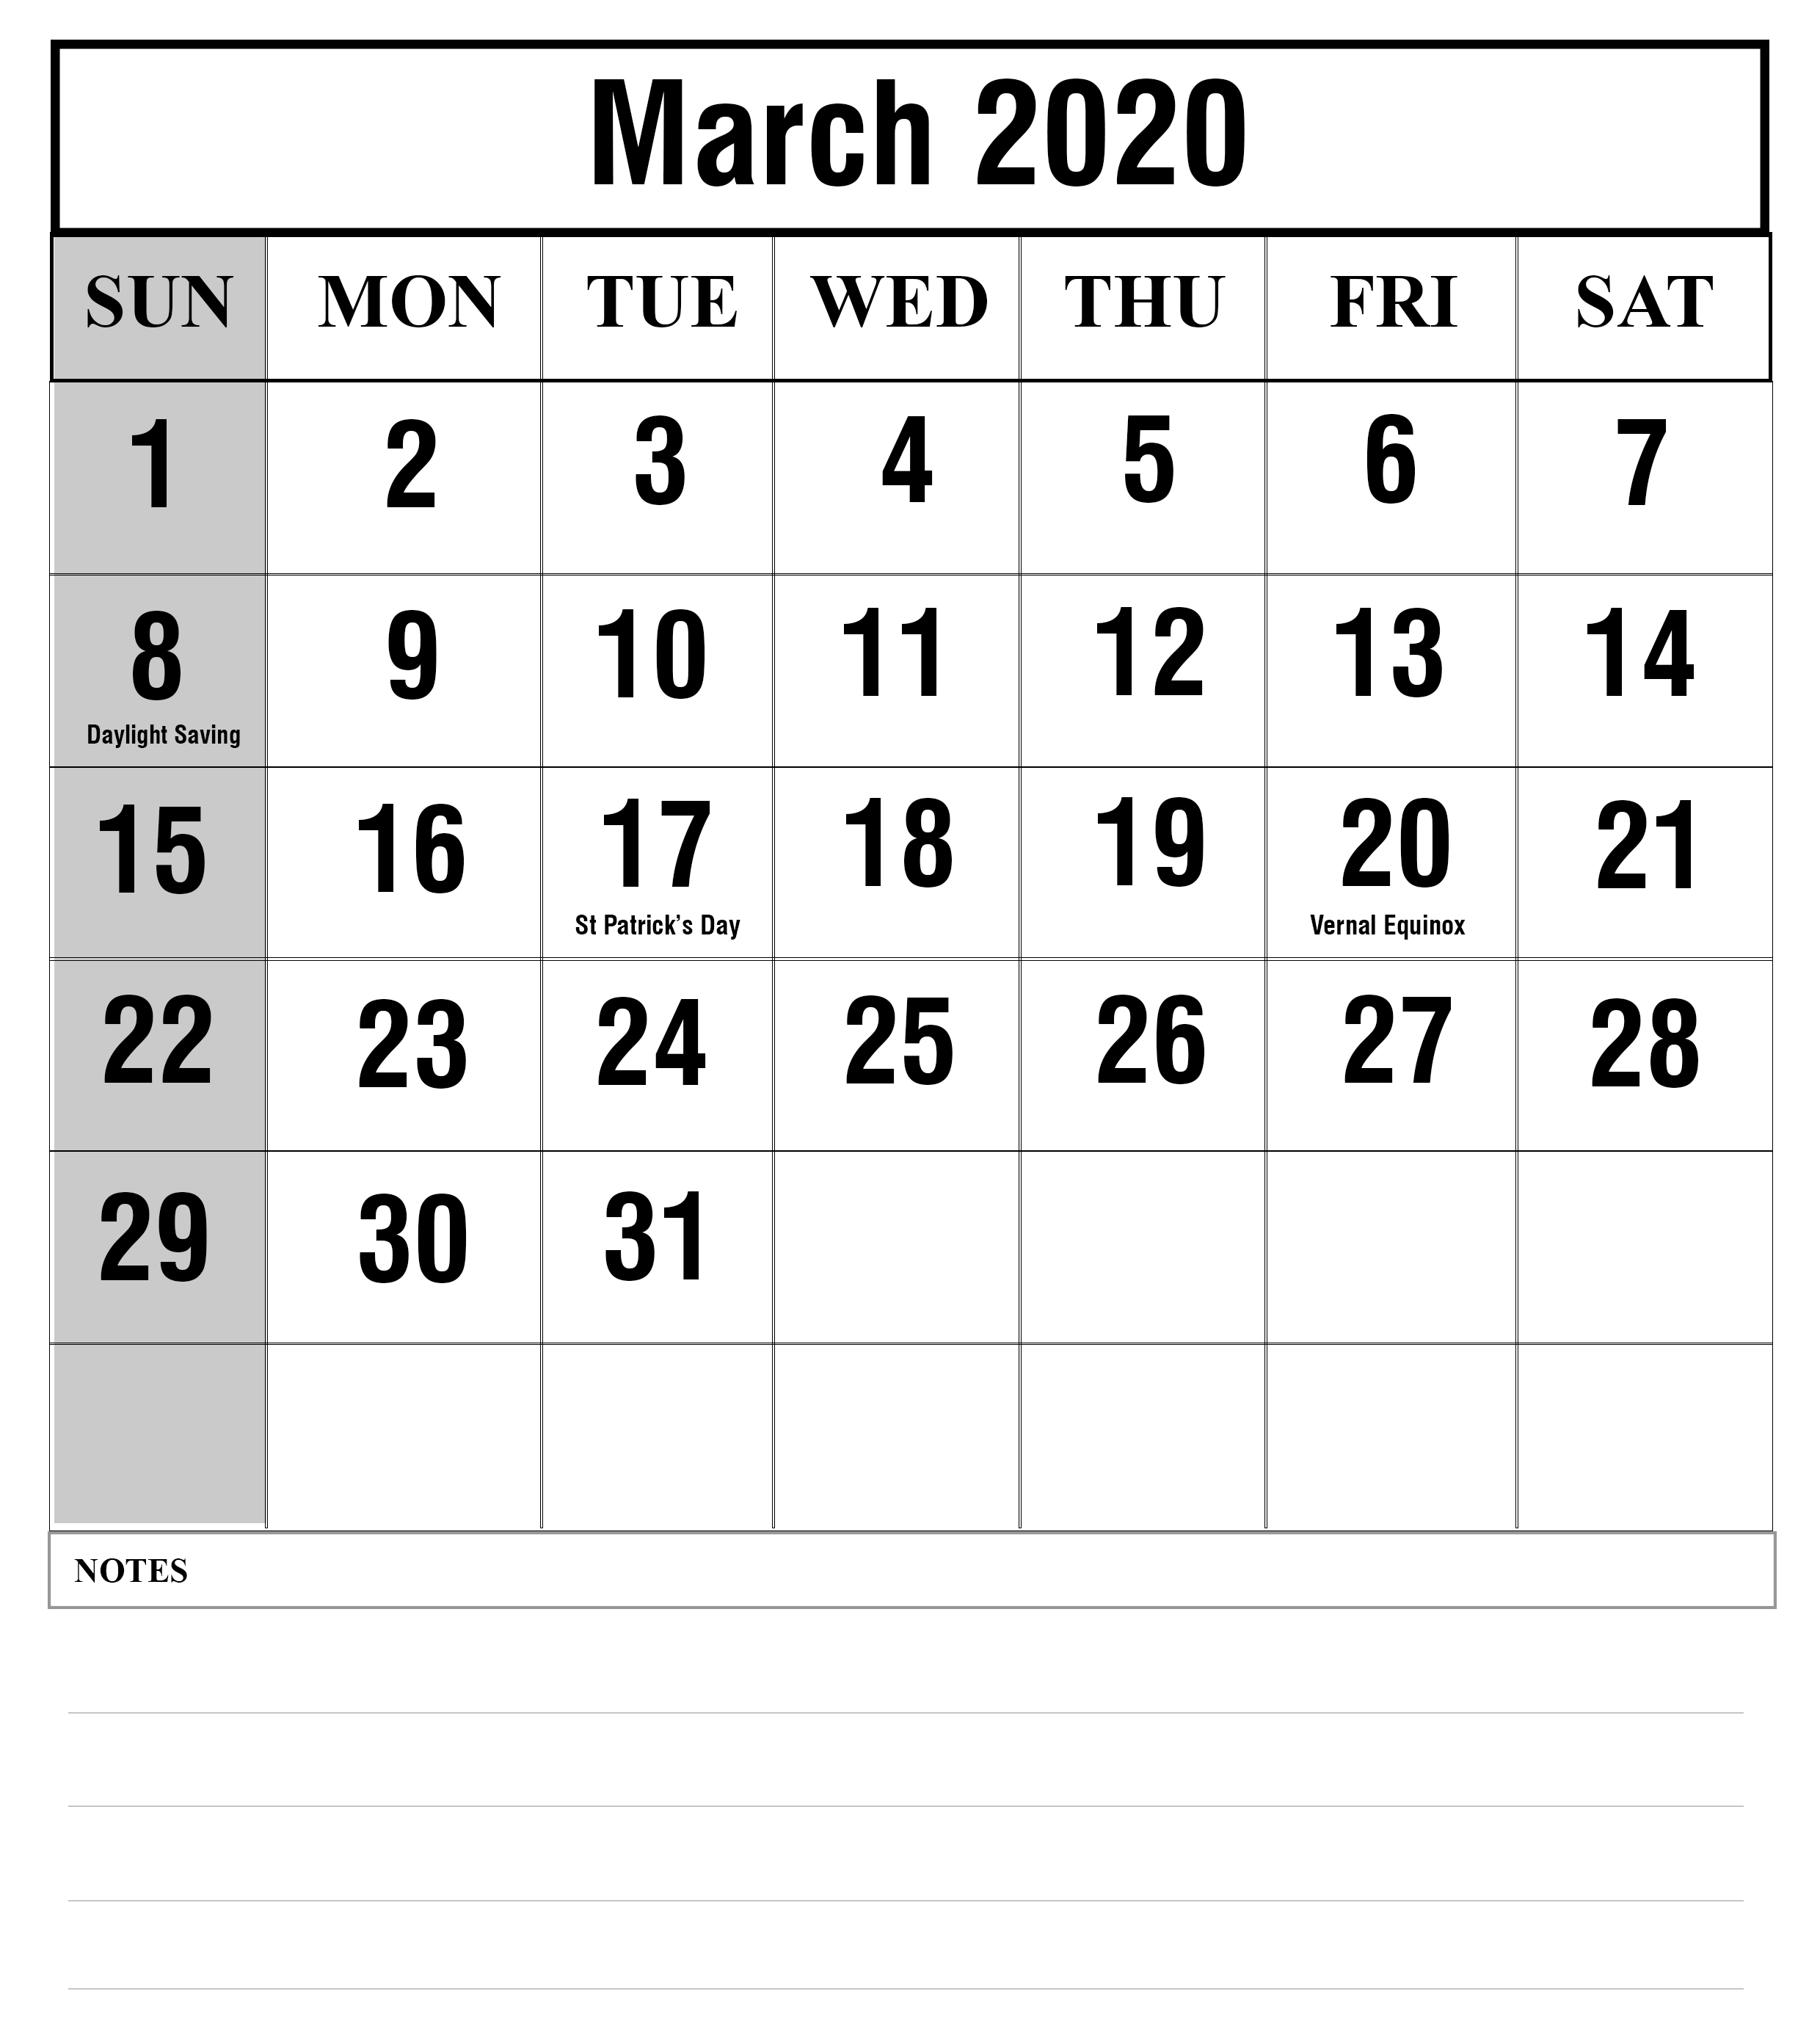 March 2020 Calendar With Notes